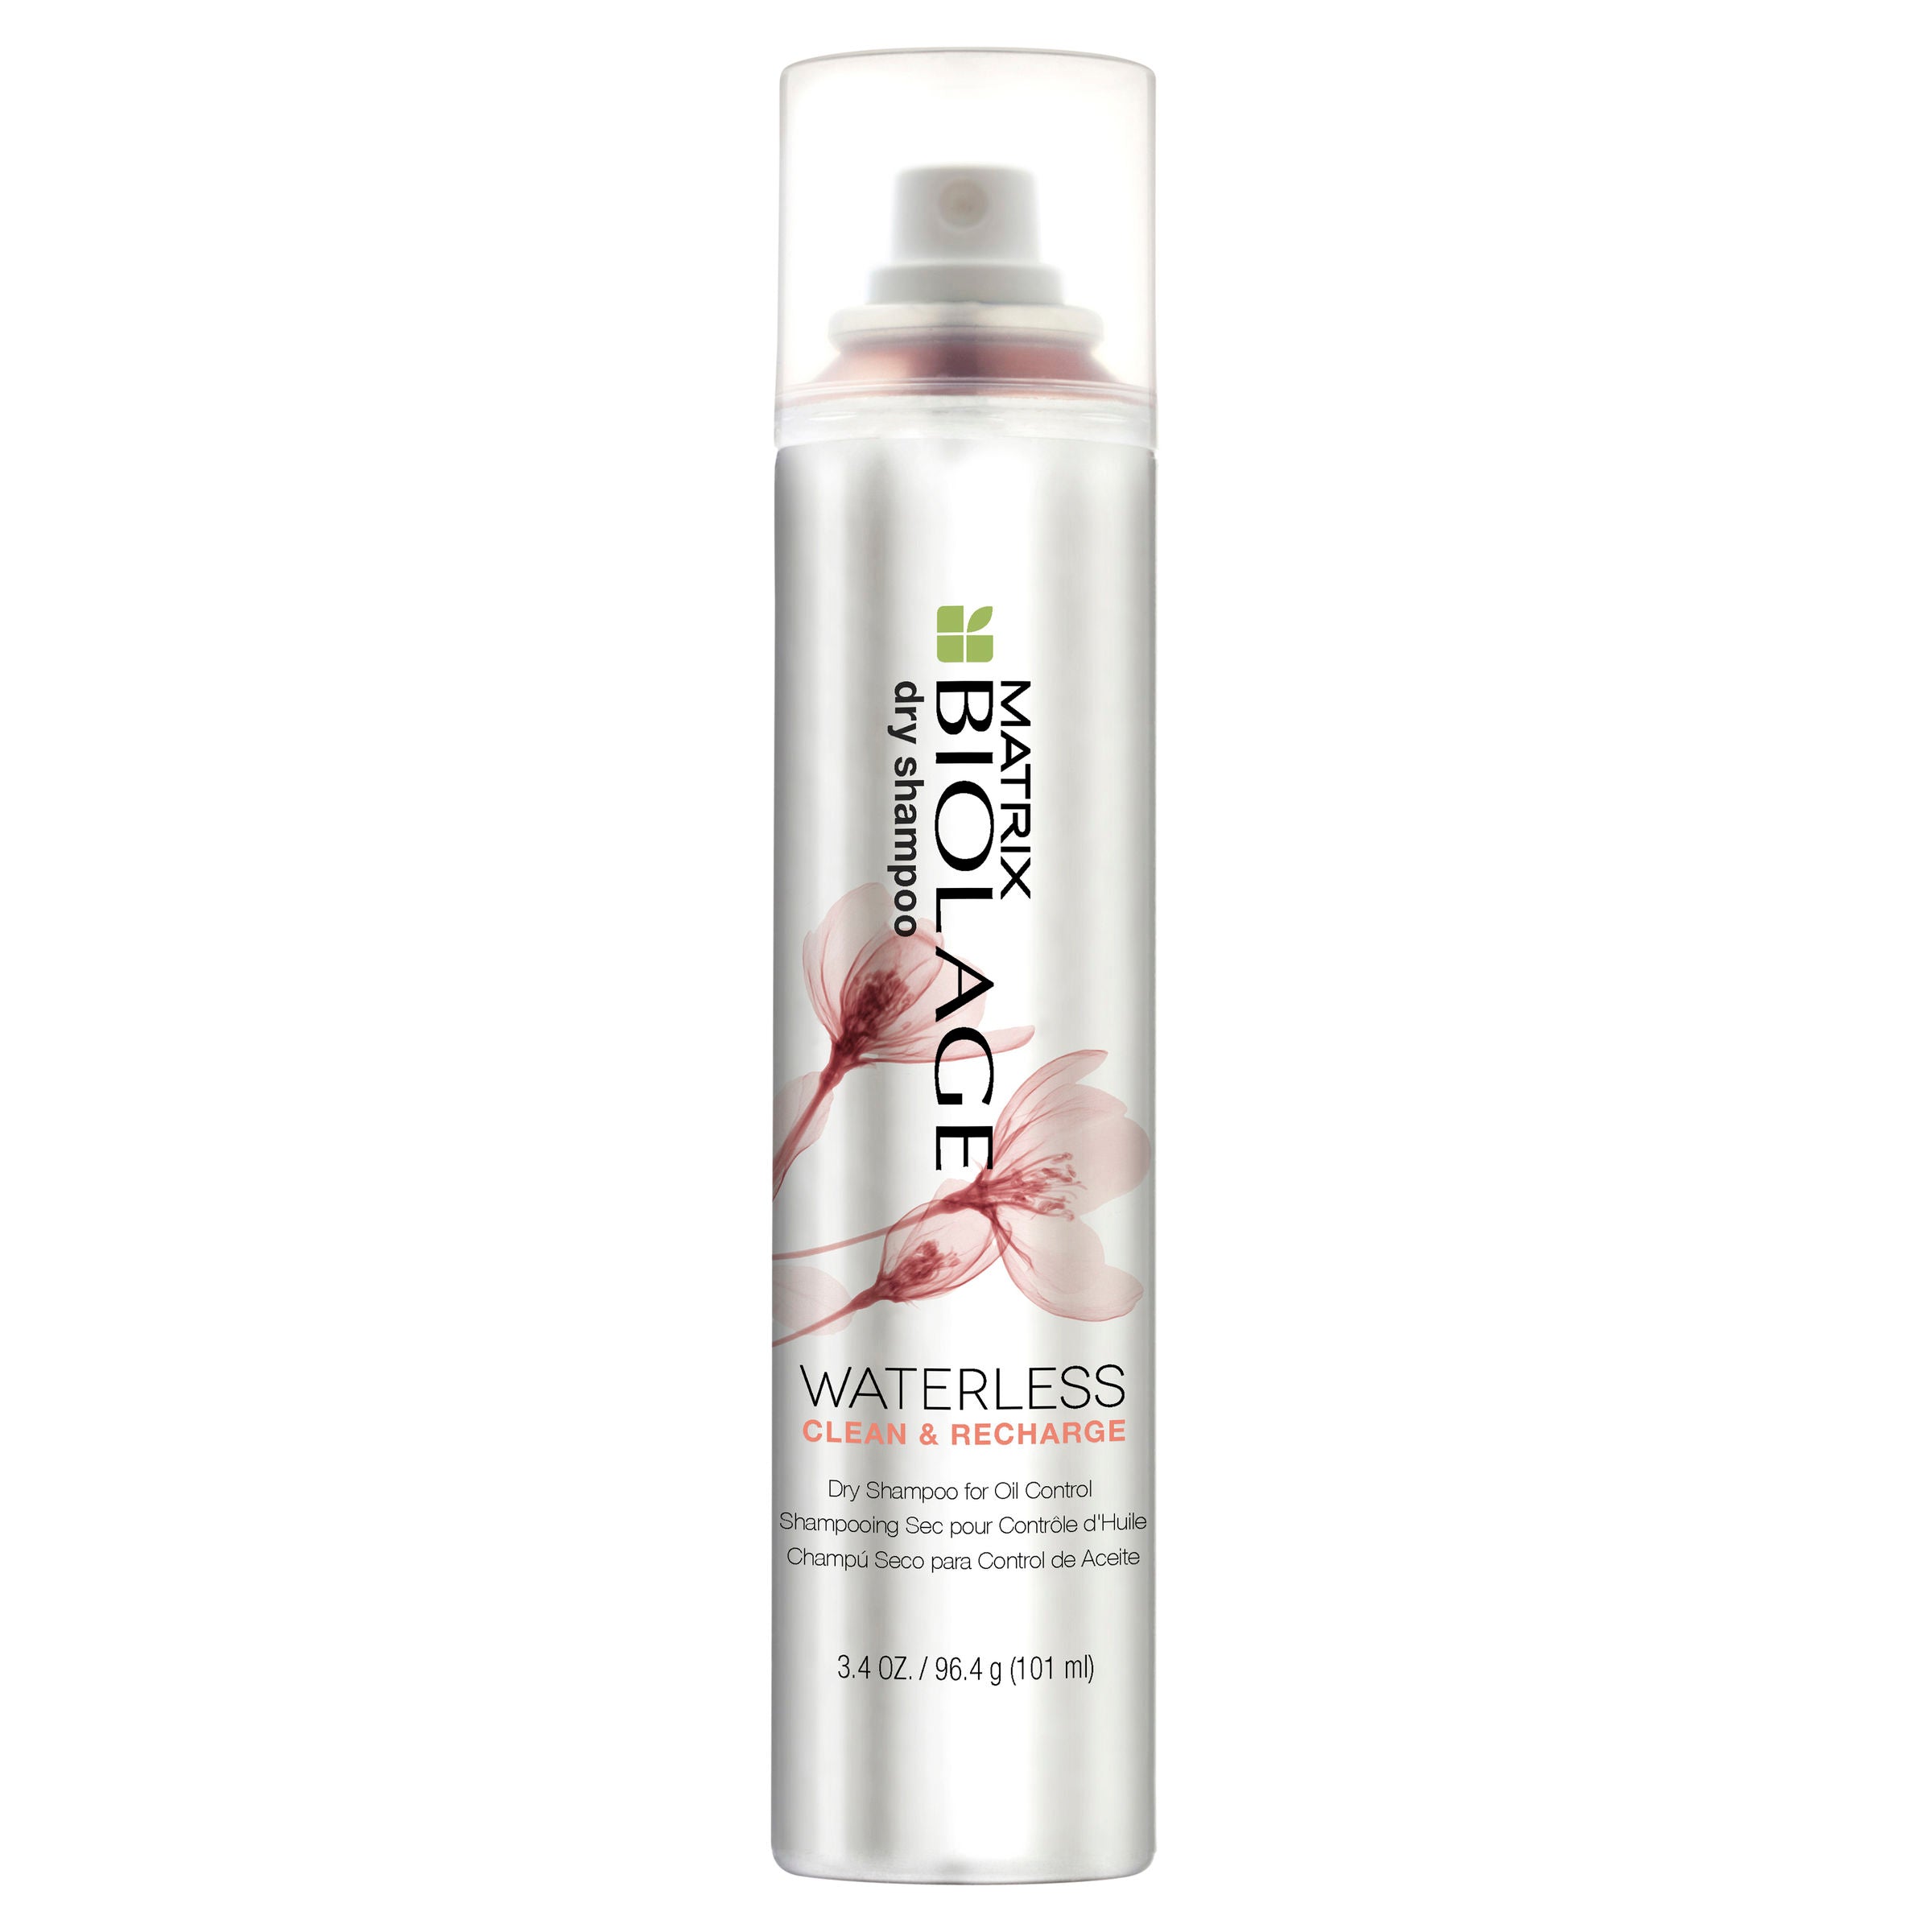 Waterless Clean & Recharge Dry Shampoo